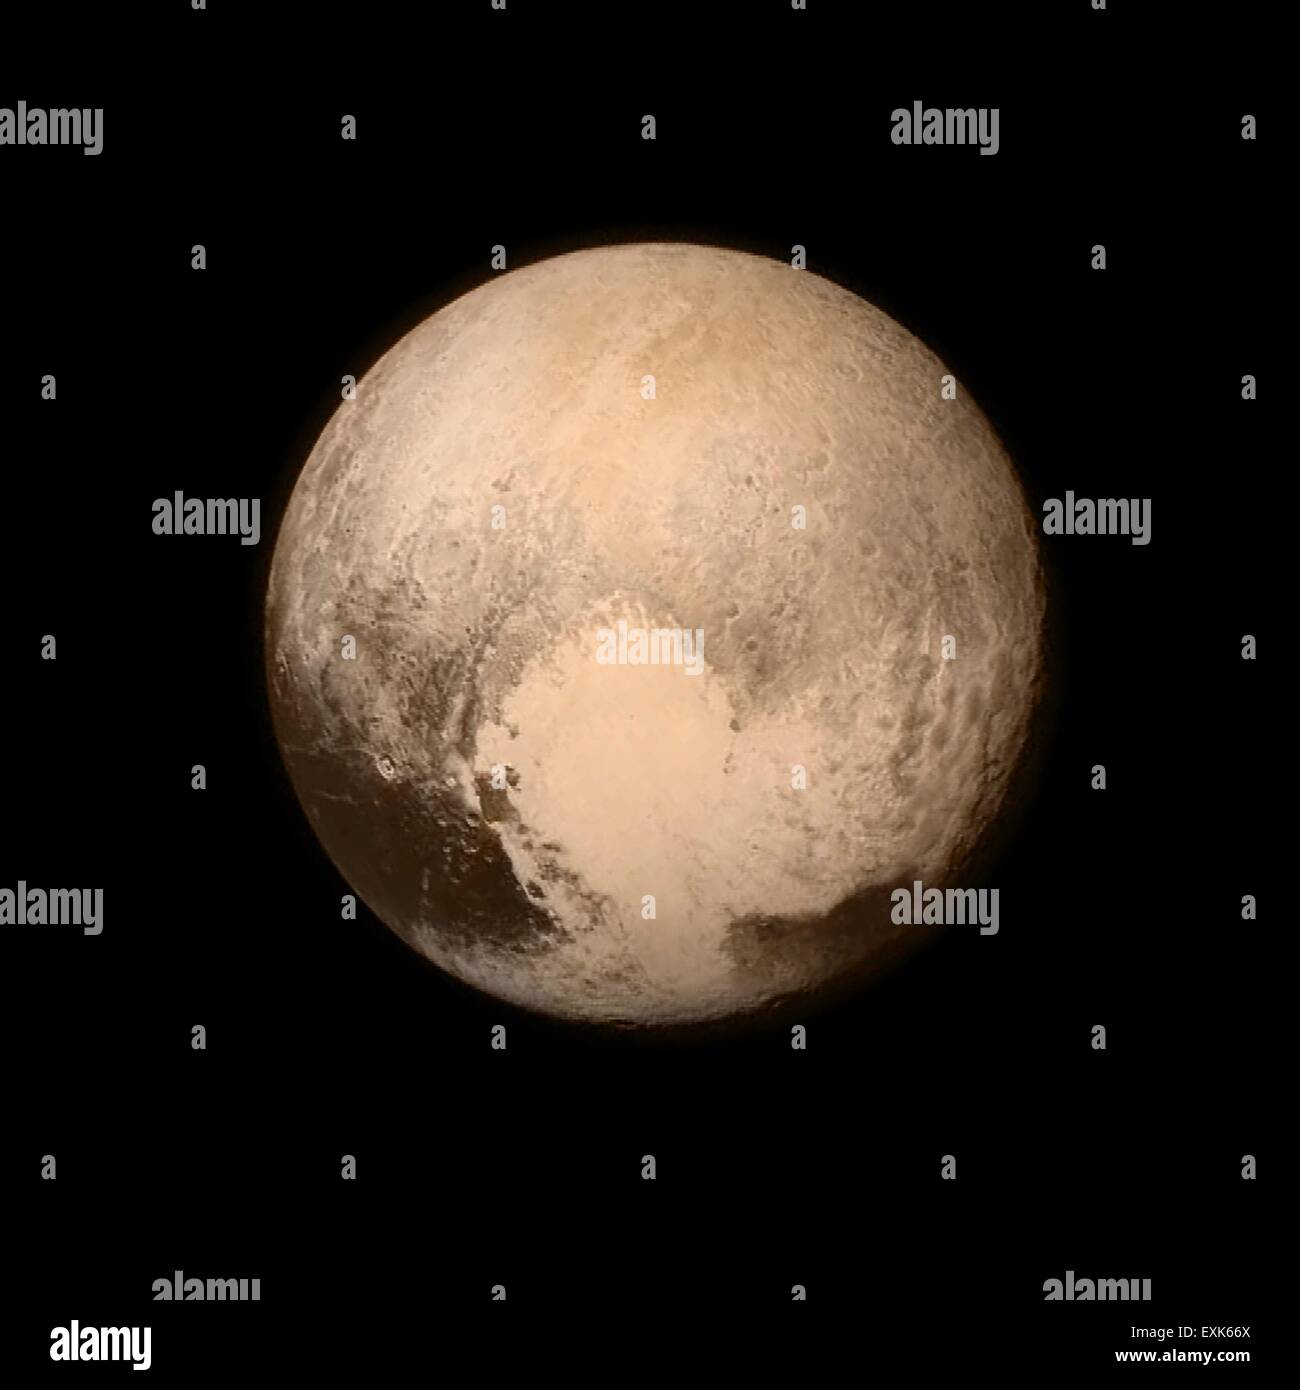 The dwarf planet Pluto as seen from the New Horizons spacecraft during the closest flyby July 14, 2015. New Horizons flyby of Pluto marks the fact that all nine planets in our Solar System have now been visited at least once by a probe. Stock Photo